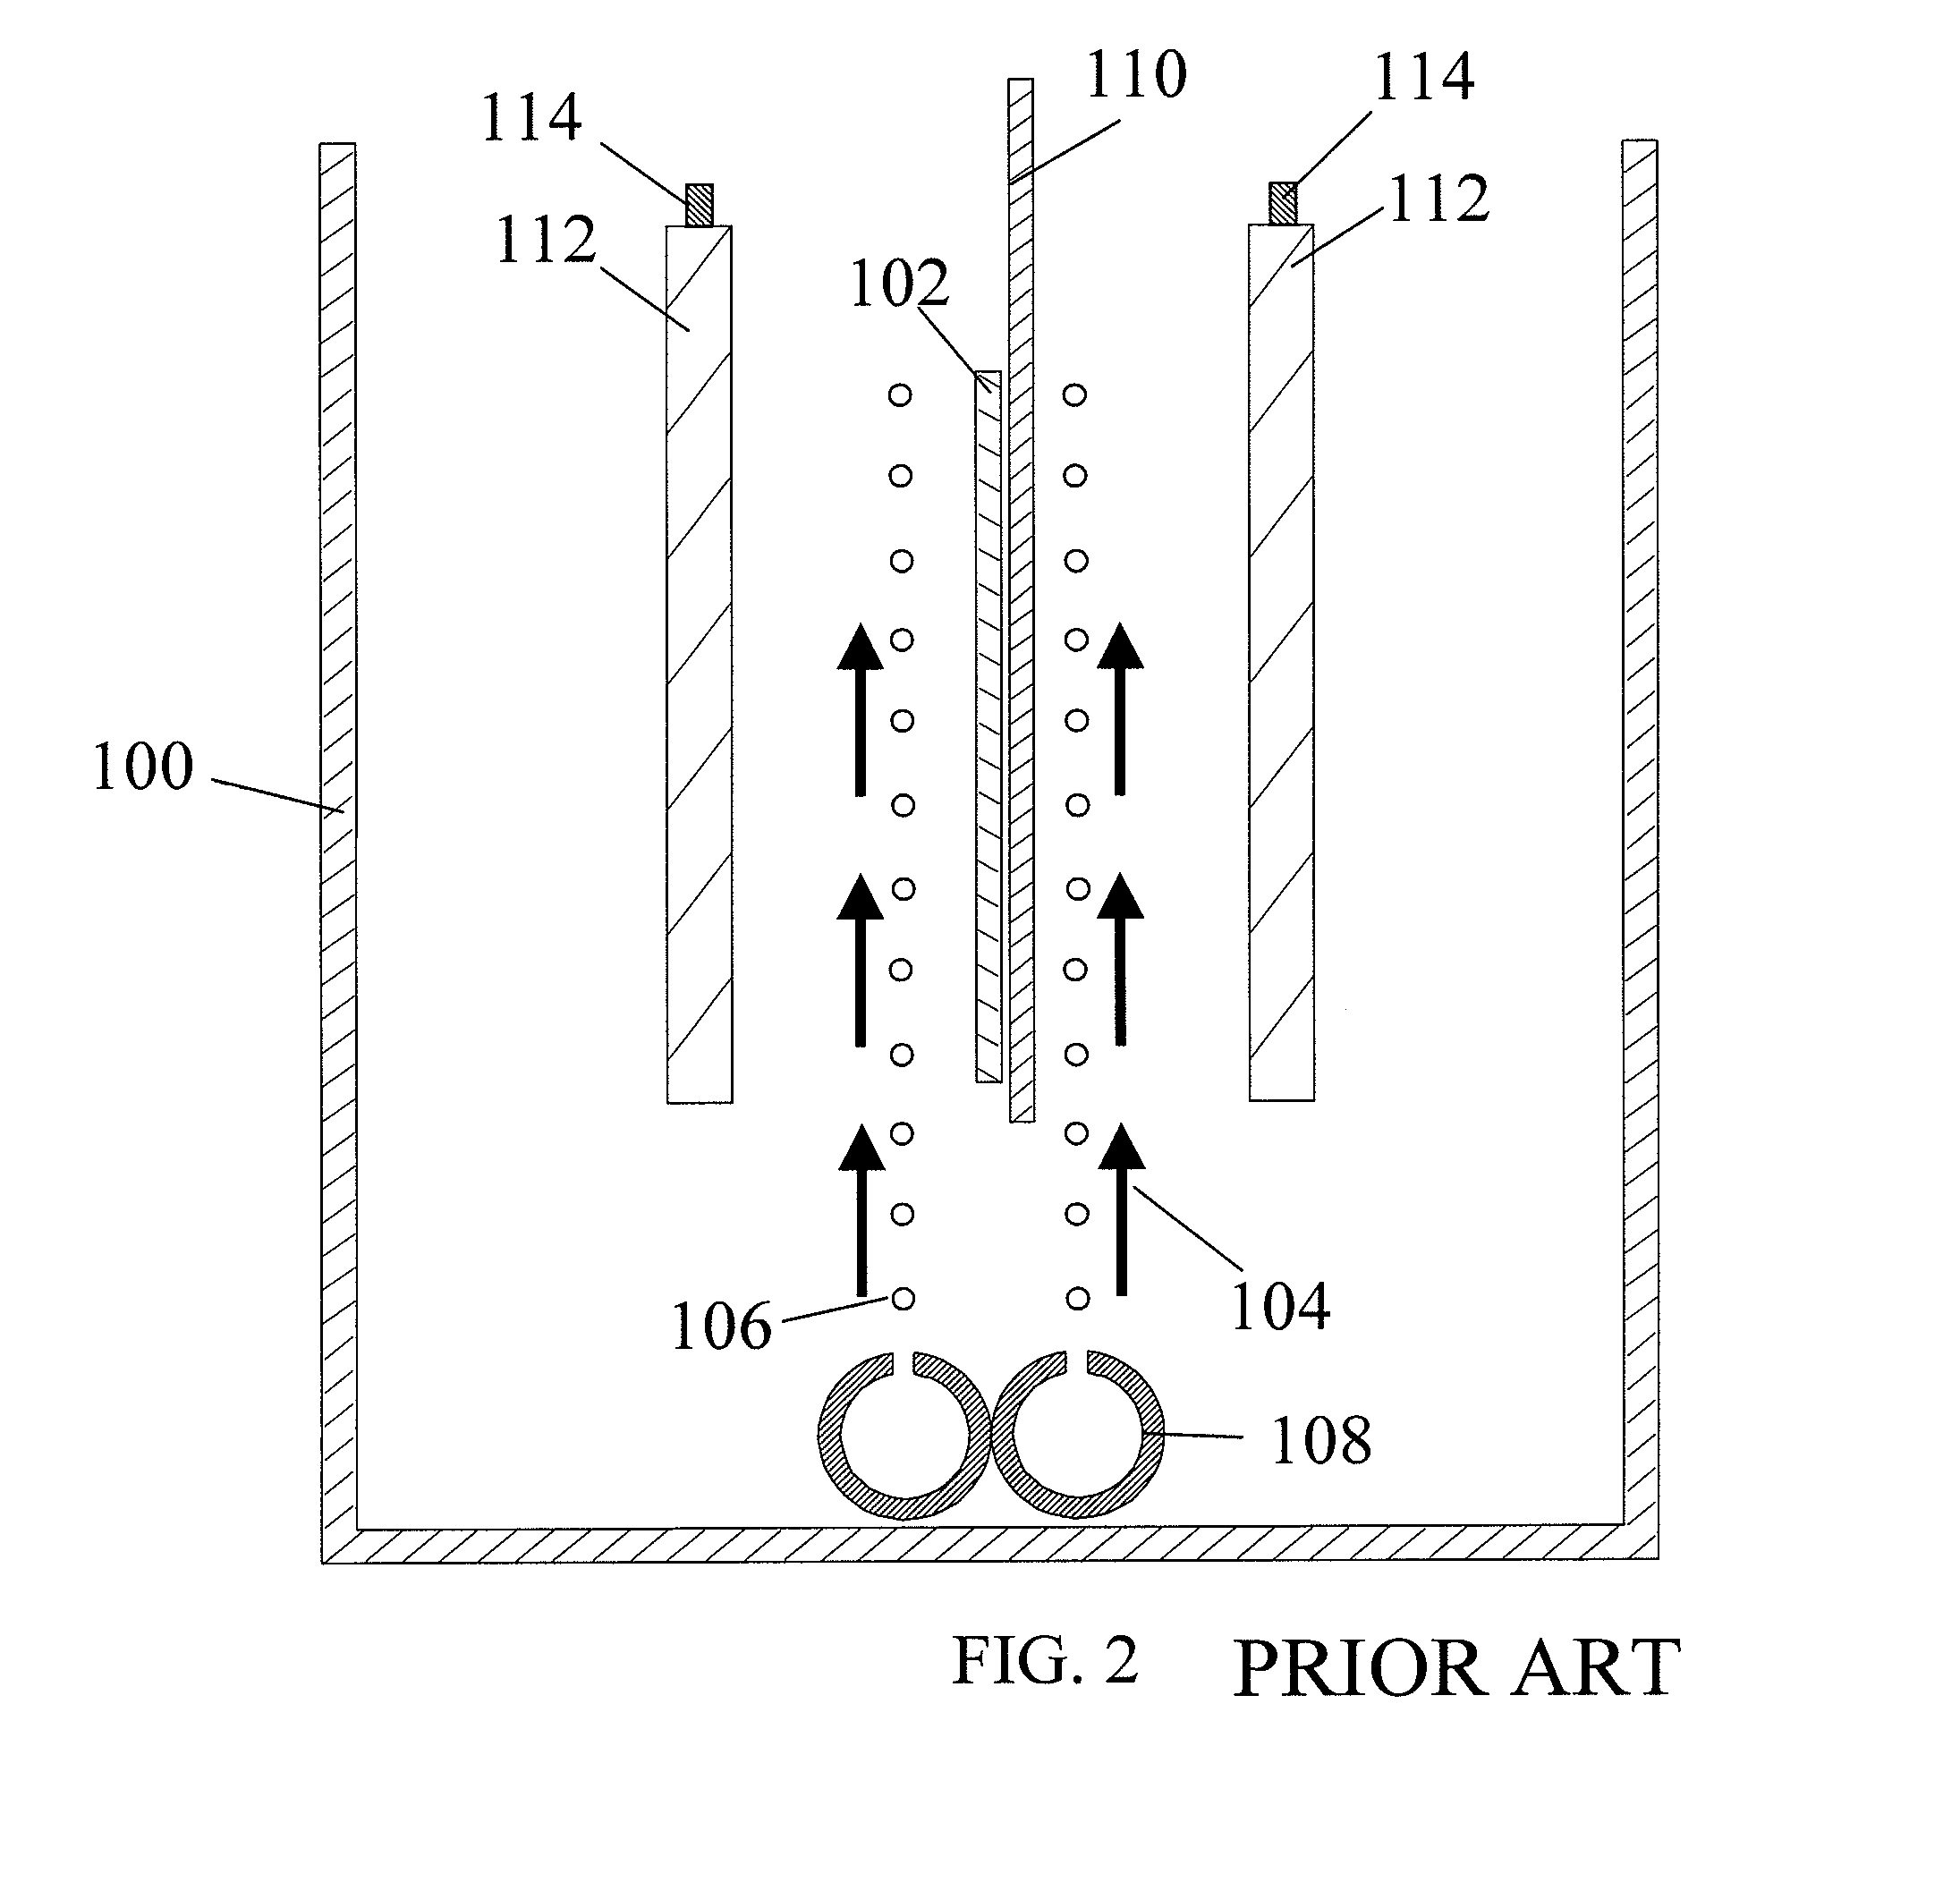 Electroplating cell with hydrodynamics facilitating more uniform deposition on a workpiece with through holes during plating